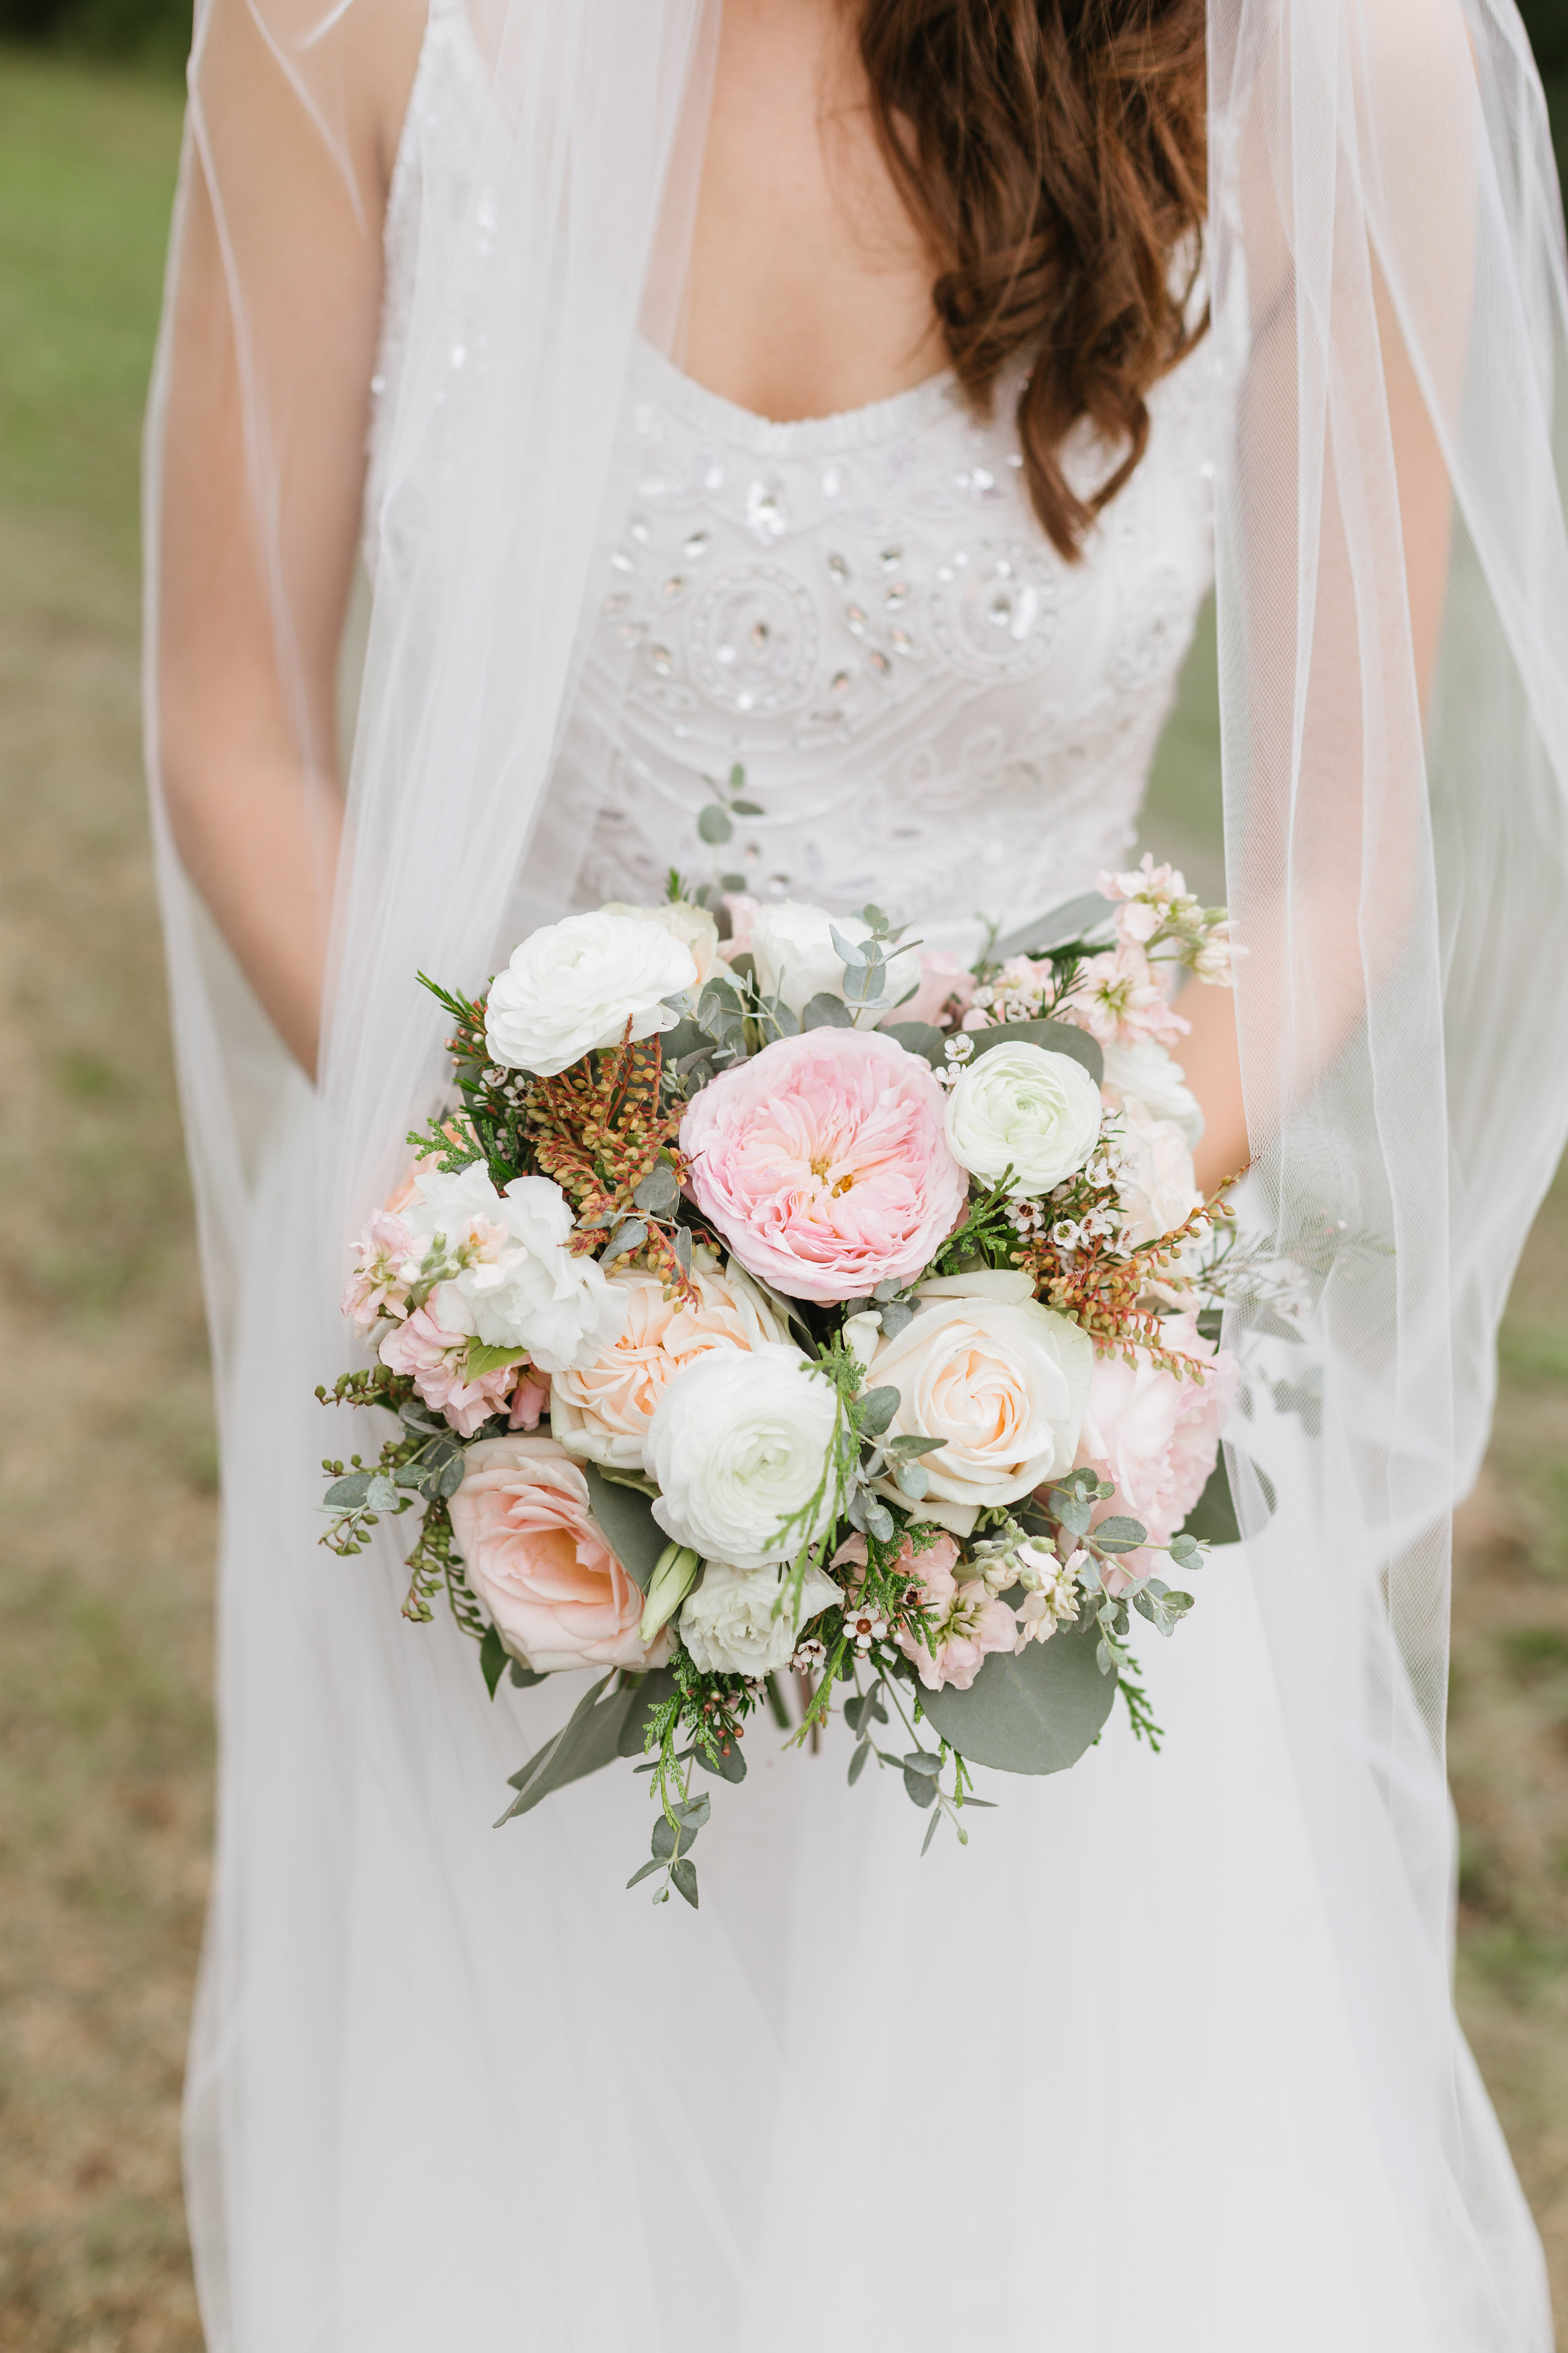 Bridal bouquet with david austin garden roses, pieris, and wildflowers